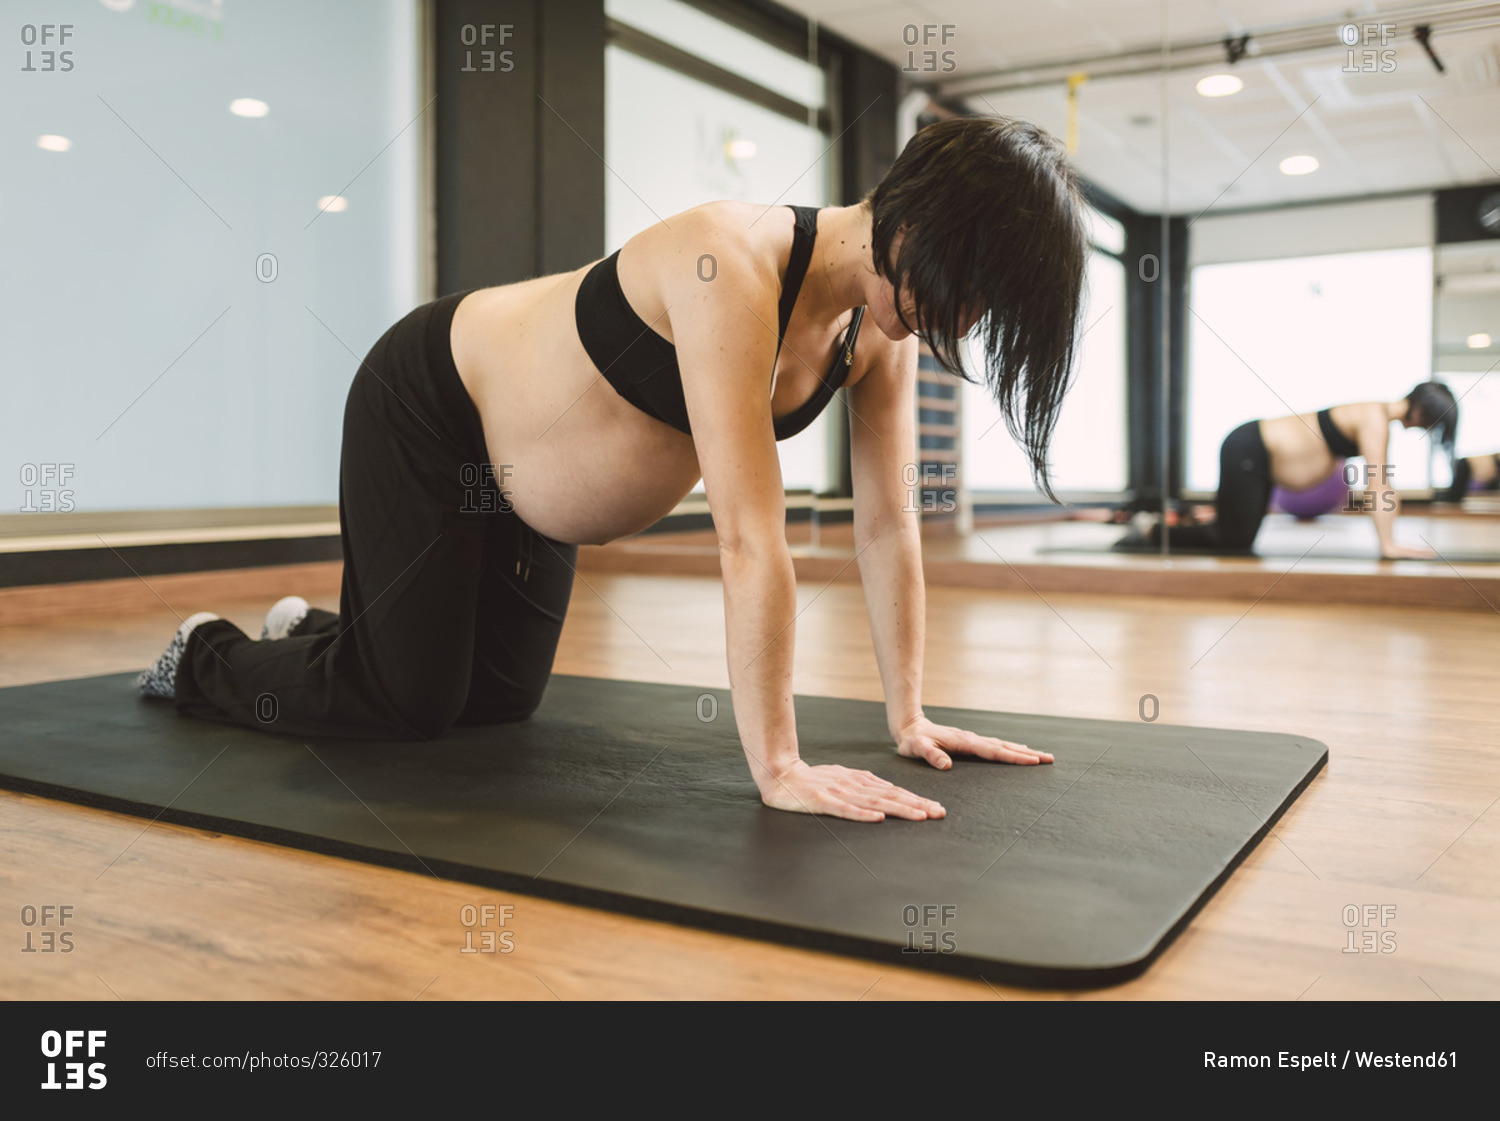 Pregnant woman doing exercises in a gym, all-fours position